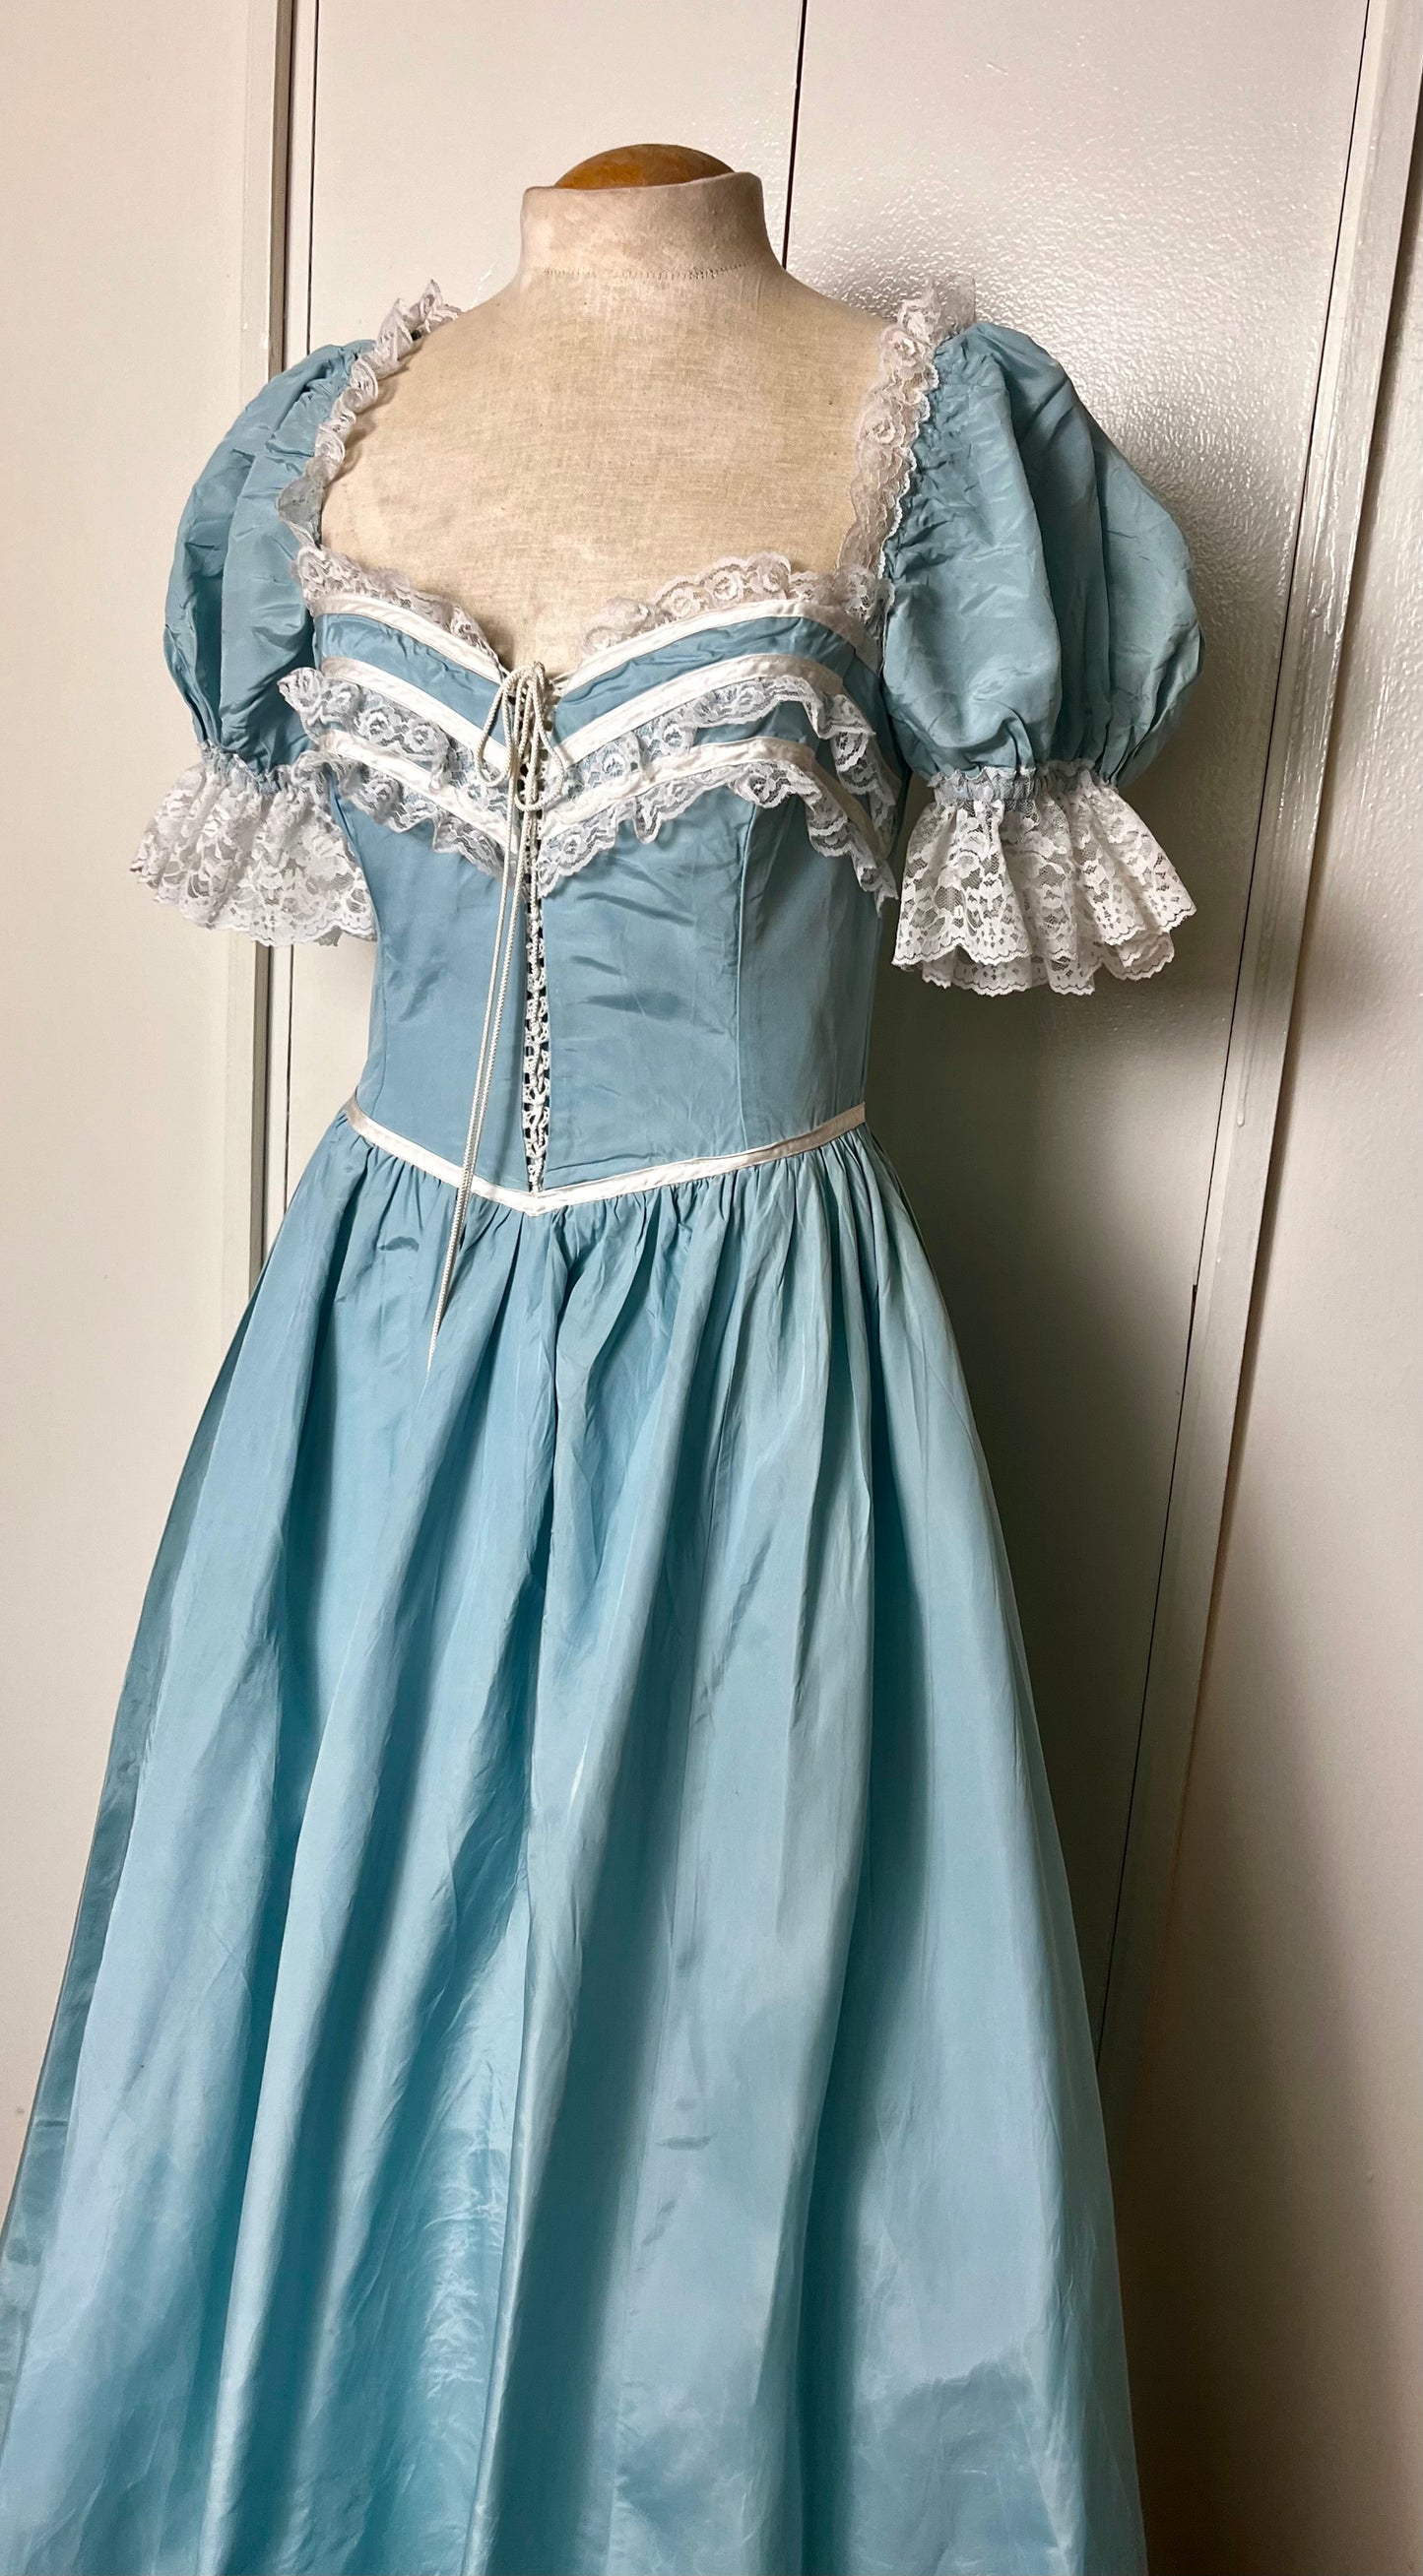 Vintage 1970's "JCPenney" Blue Gown (in the style of Gunne Sax)